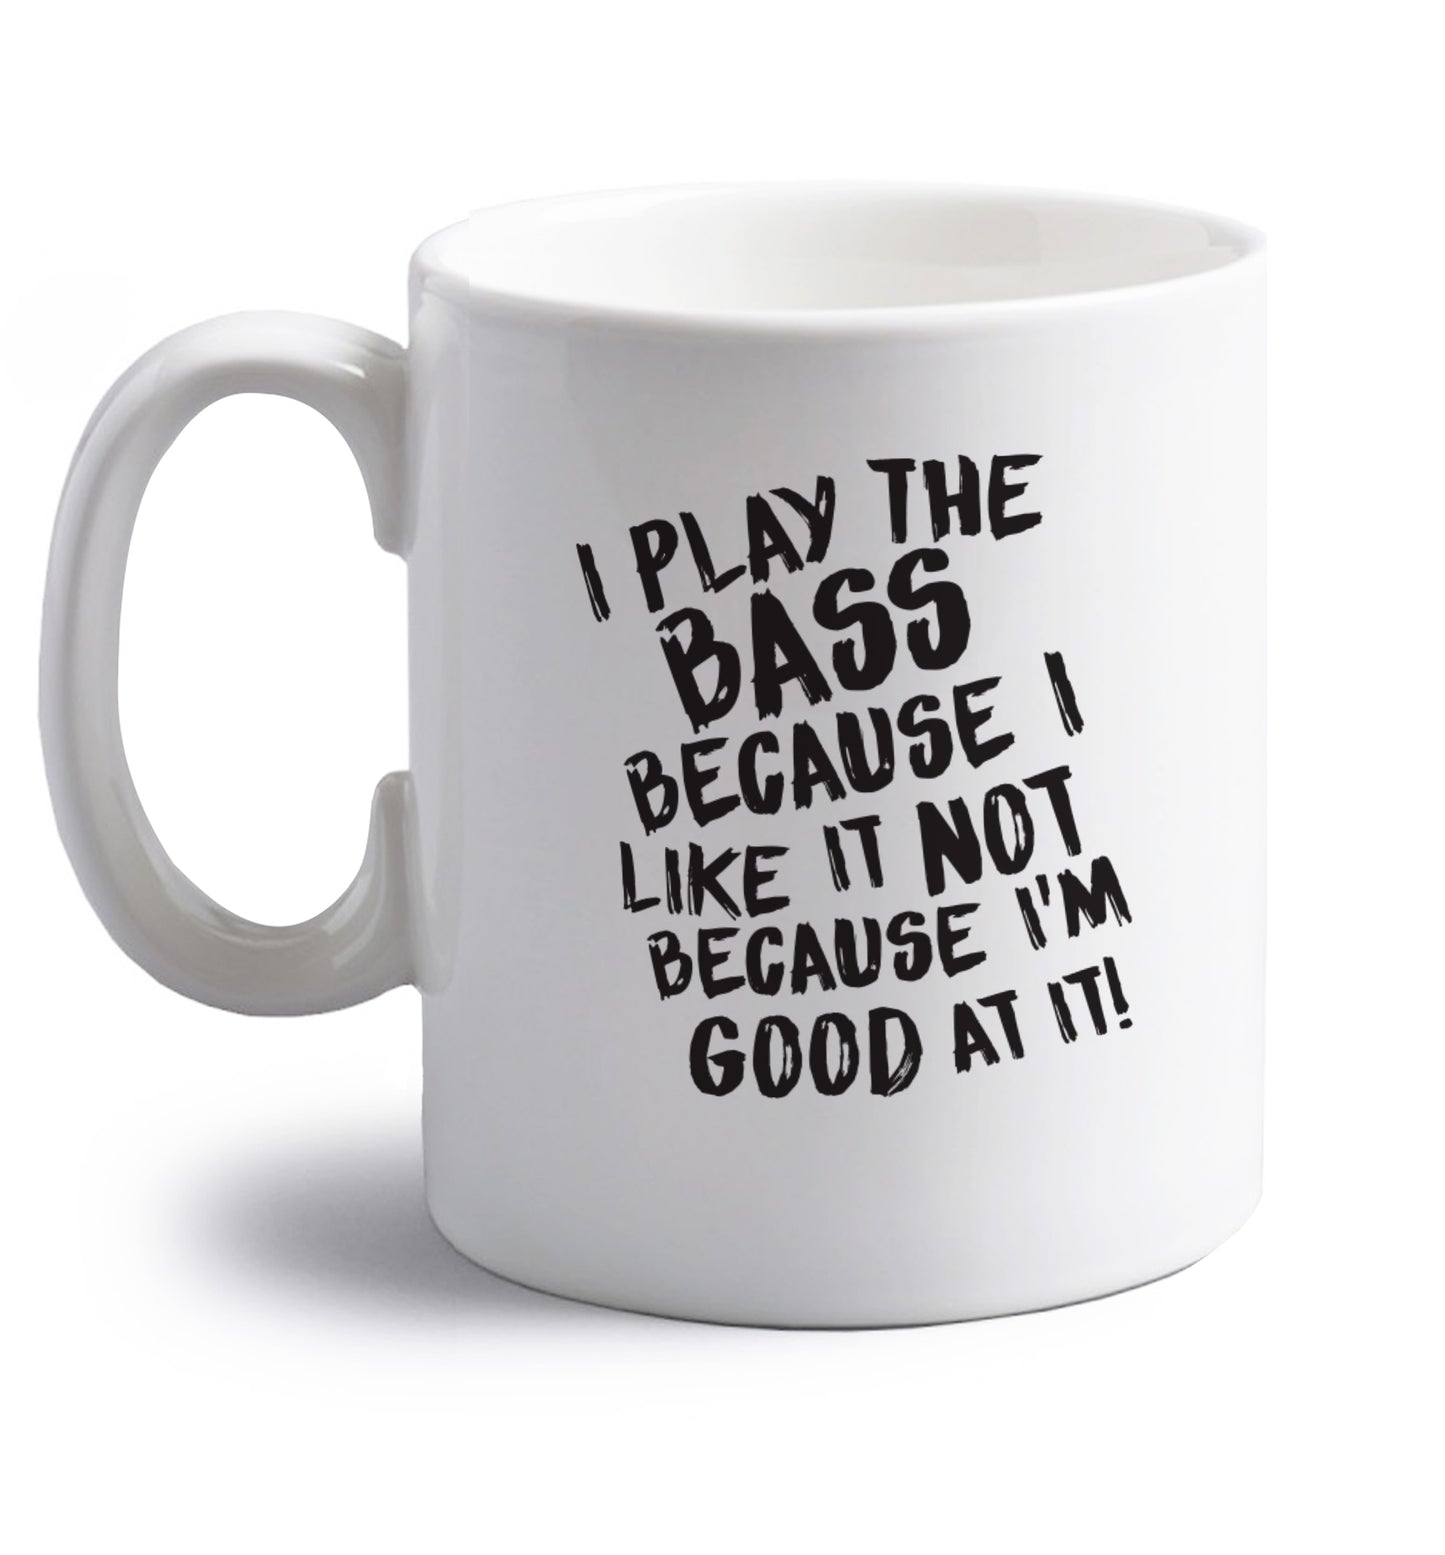 I play the bass because I like it not because I'm good at it right handed white ceramic mug 